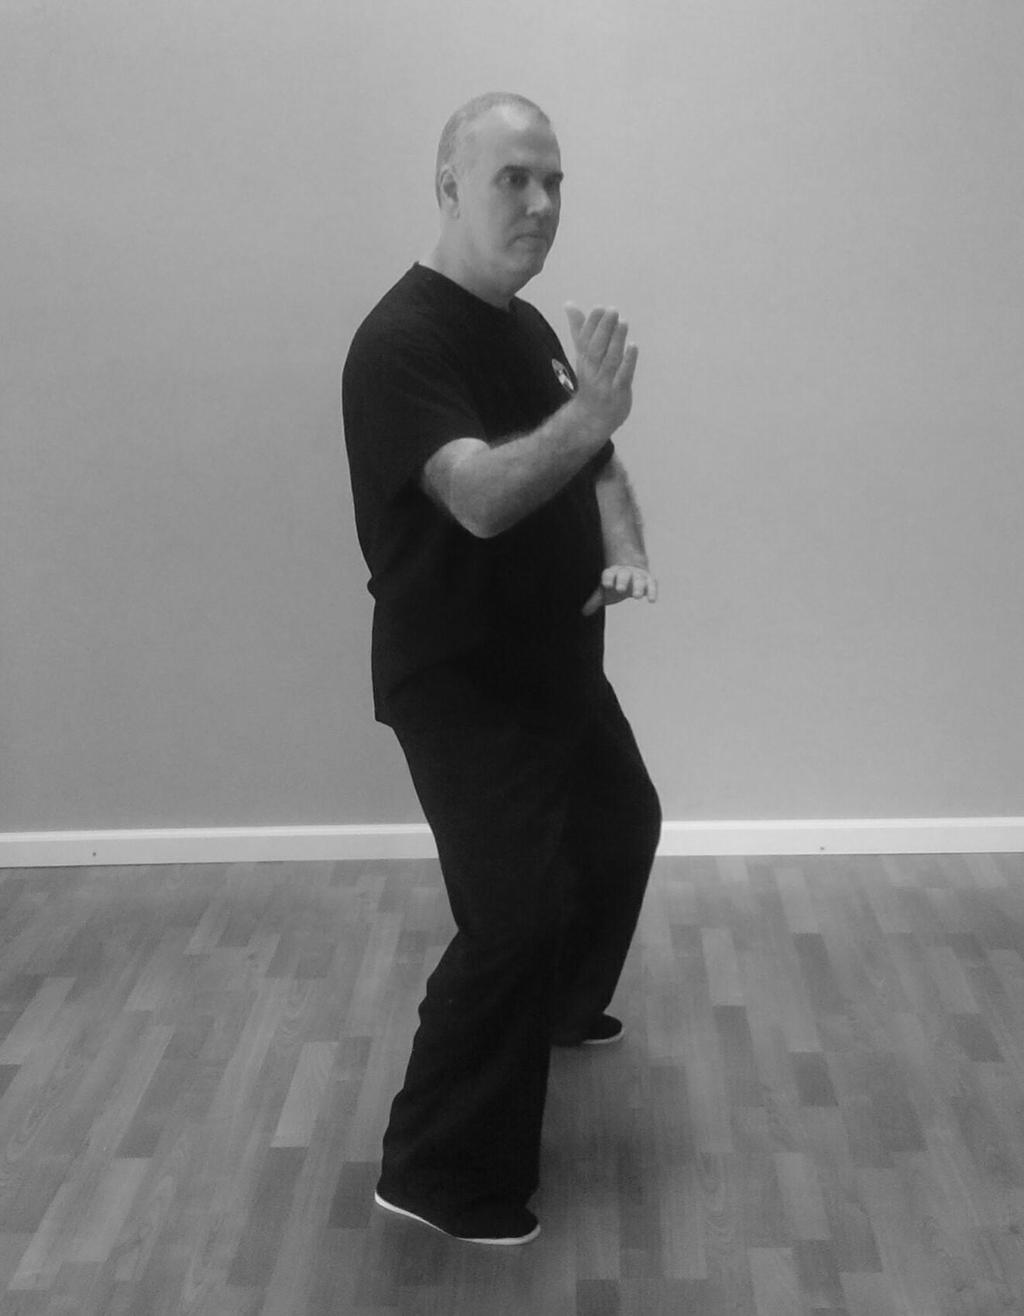 Raise your right knee into a crane stance, contouring your right elbow upward